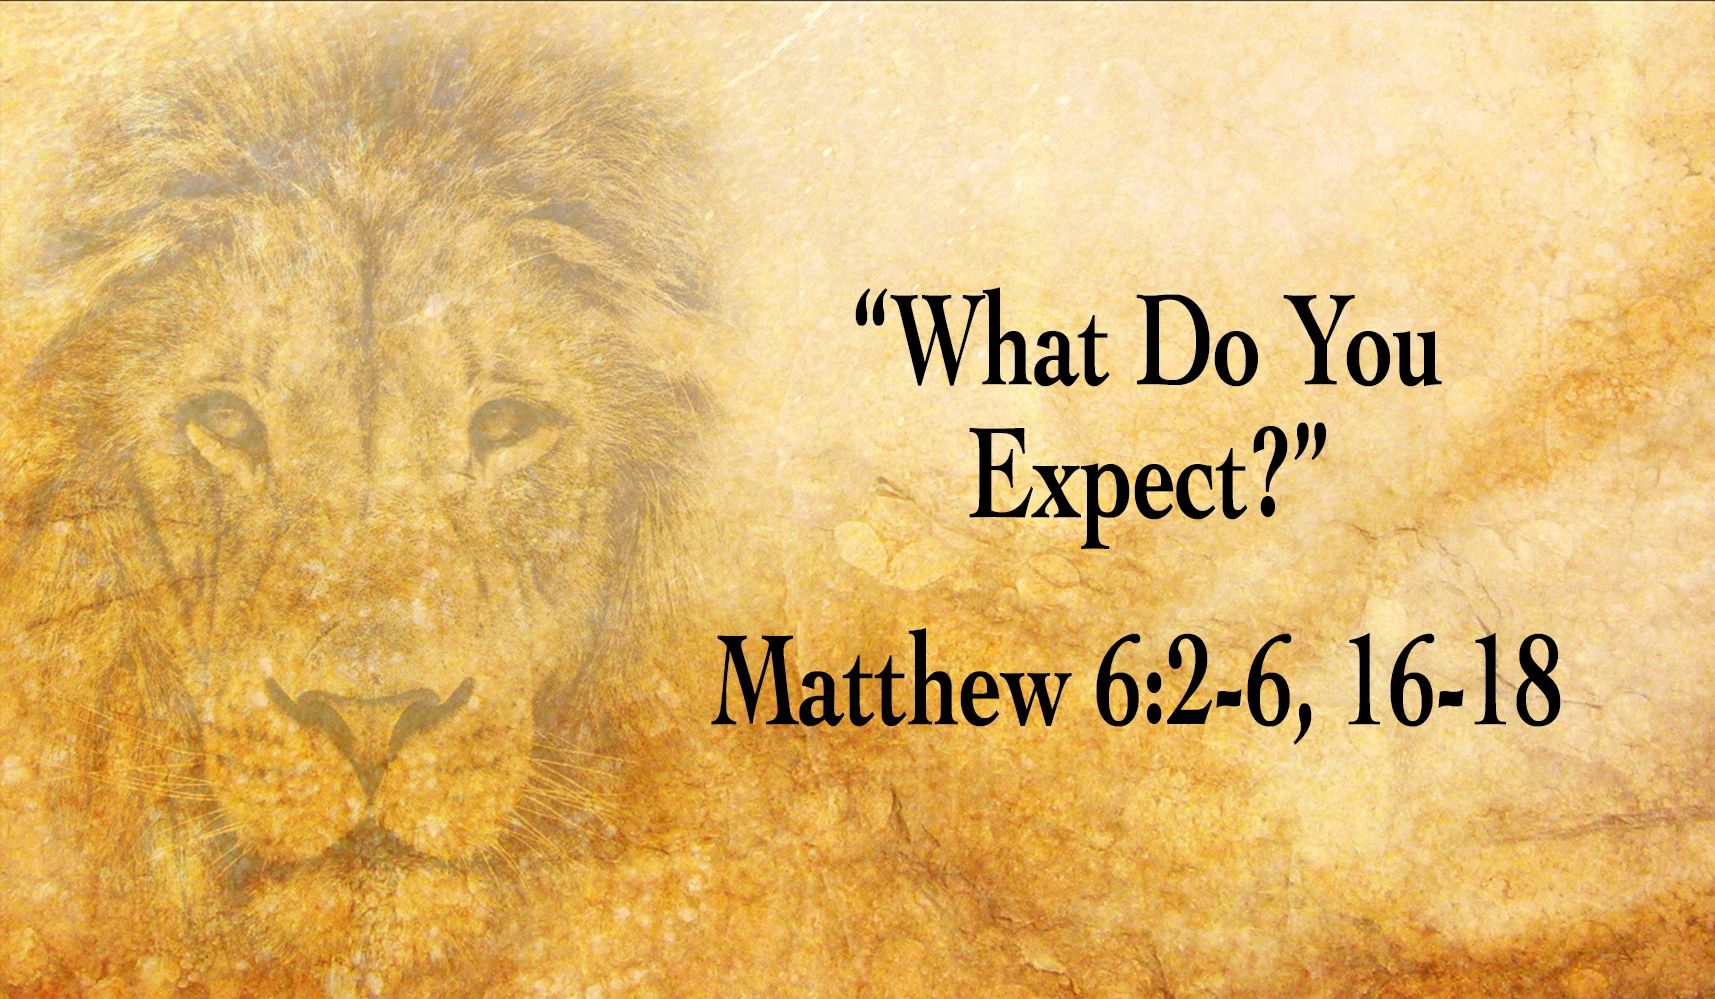 What Do You Expect? -Matthew 6:2-6, 16-18